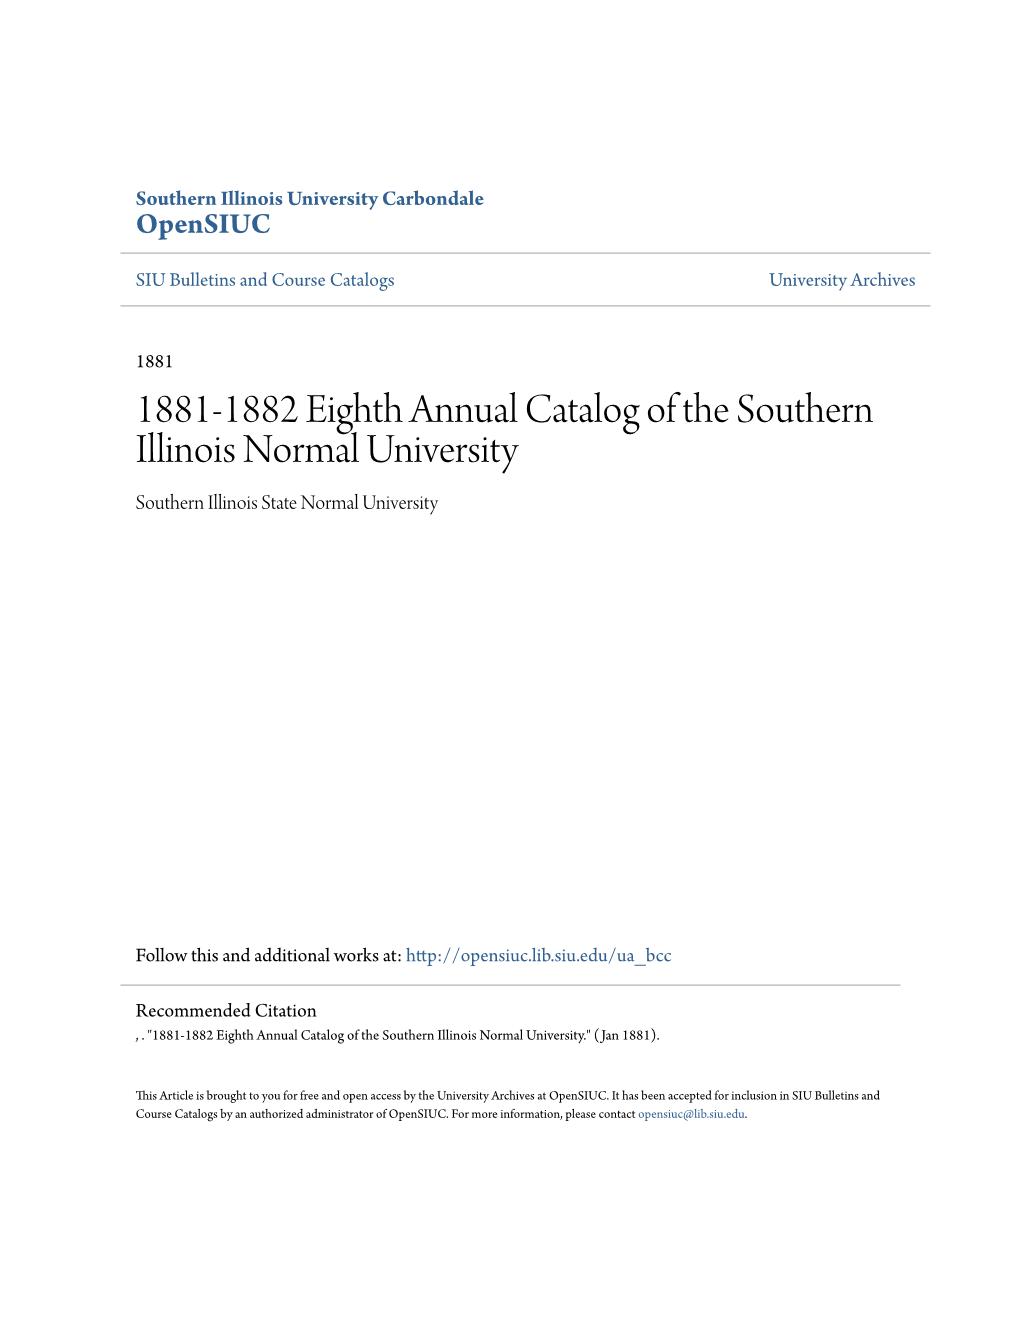 1881-1882 Eighth Annual Catalog of the Southern Illinois Normal University Southern Illinois State Normal University